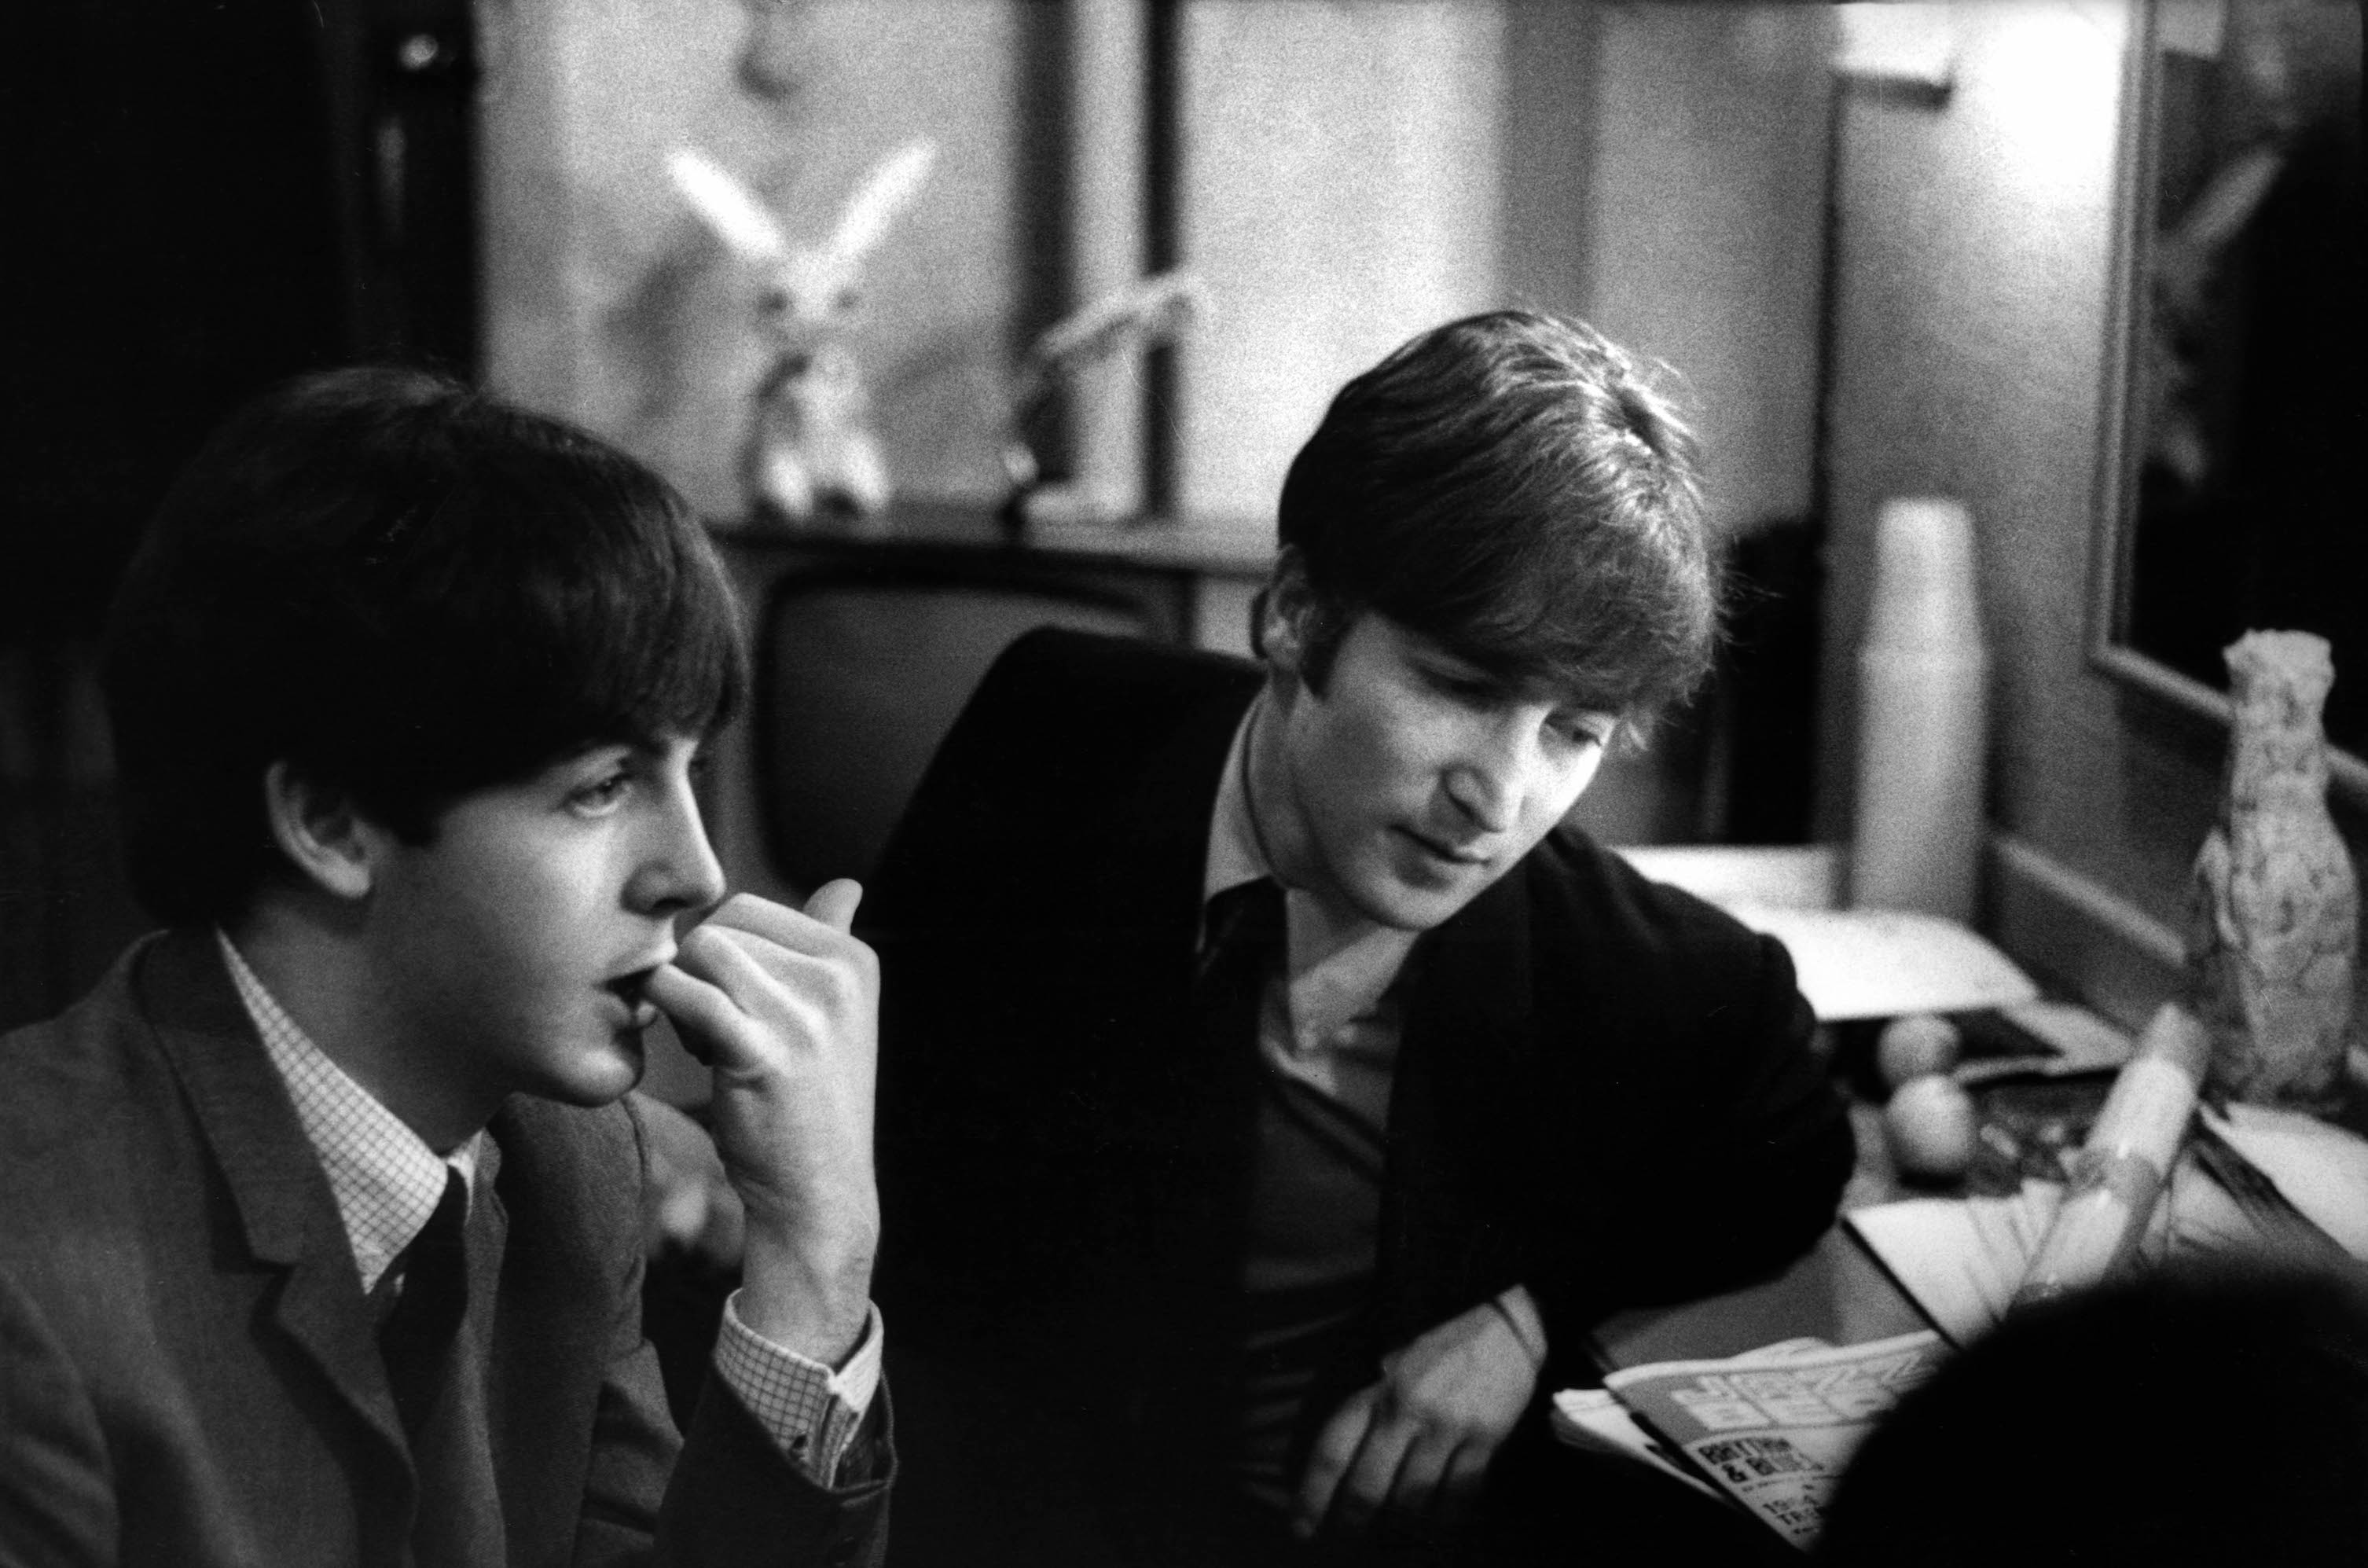 Paul McCartney and John Lennon backstage at The Beatles' Christmas Show in London